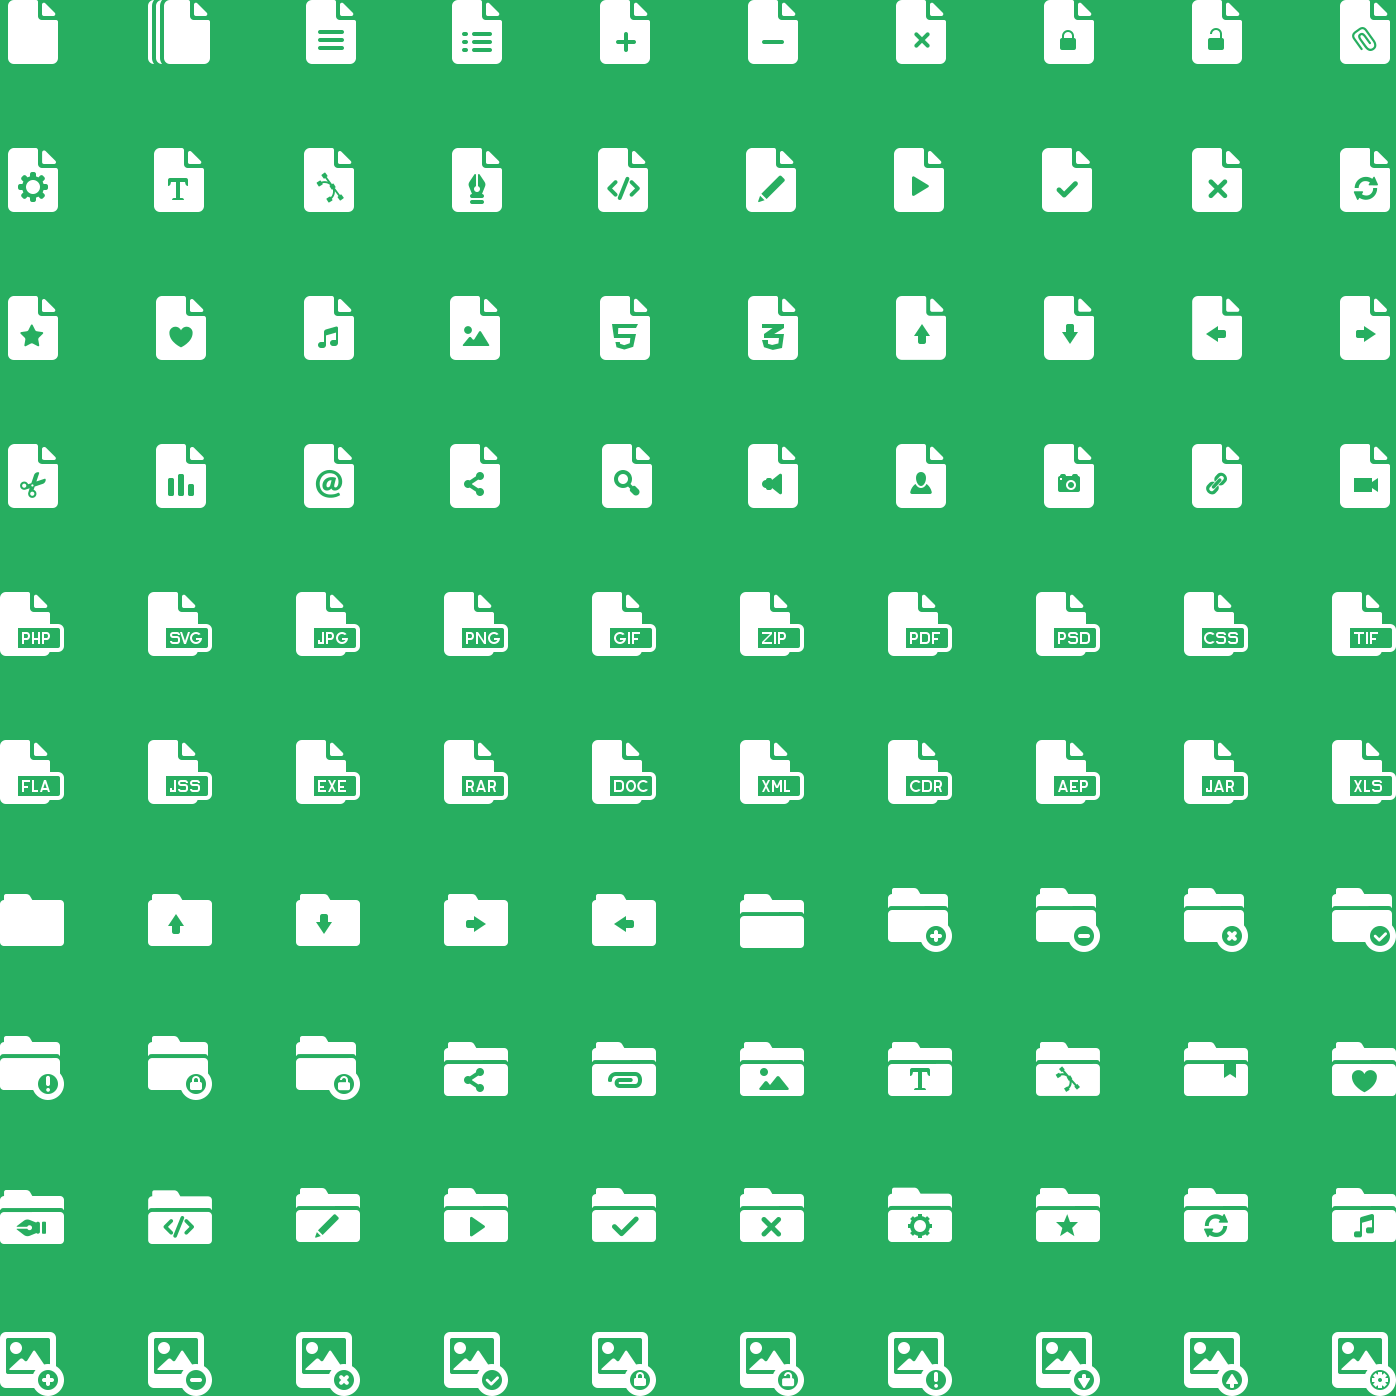 Files and Folders Glyph Icons